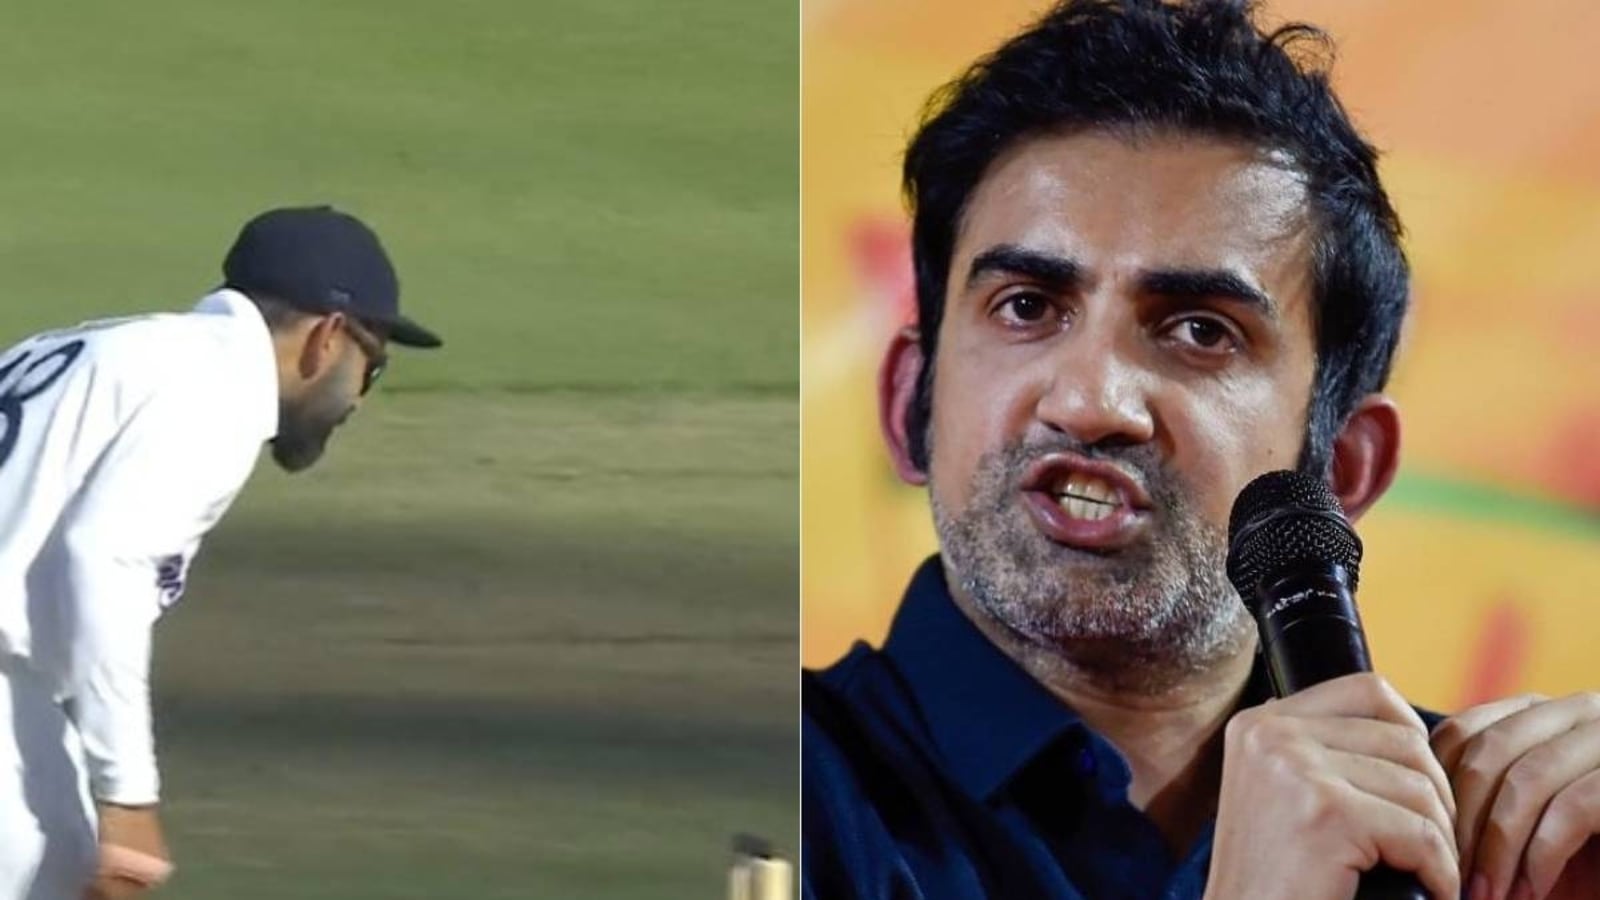 Can't be a role model in this manner': Furious Gambhir lambasts 'immature' Kohli for 'exaggerated' stump-mic reaction | Cricket - Hindustan Times